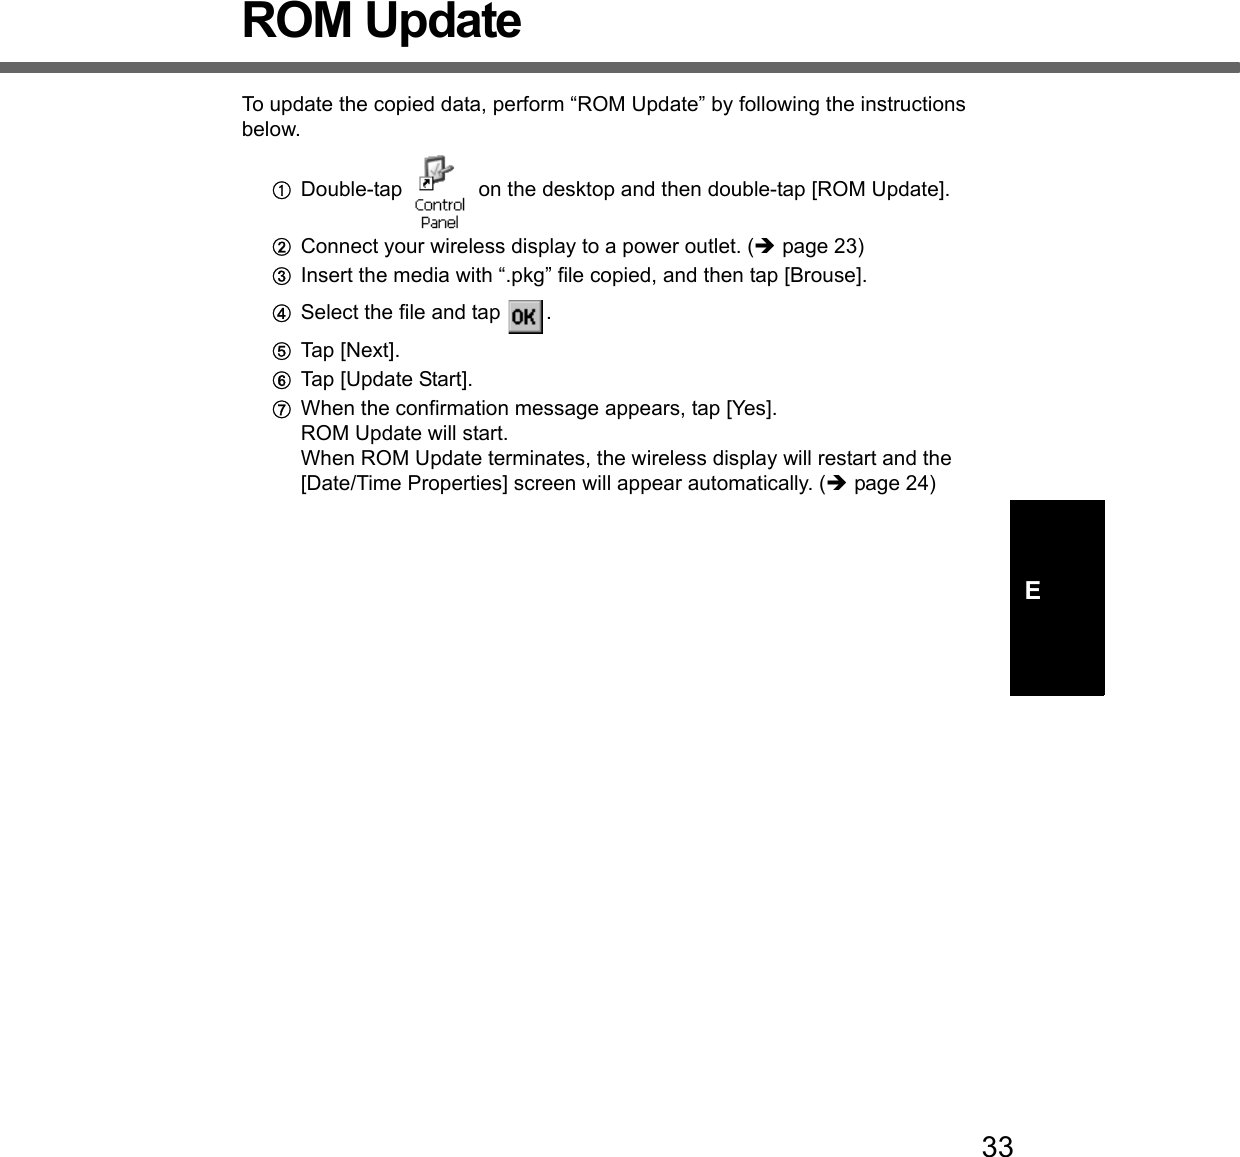 33EROM UpdateTo update the copied data, perform “ROM Update” by following the instructions below.ADouble-tap   on the desktop and then double-tap [ROM Update].BConnect your wireless display to a power outlet. (Îpage 23)CInsert the media with “.pkg” file copied, and then tap [Brouse].DSelect the file and tap  .ETap [Next].FTap [Update Start].GWhen the confirmation message appears, tap [Yes].ROM Update will start.When ROM Update terminates, the wireless display will restart and the [Date/Time Properties] screen will appear automatically. (Îpage 24)